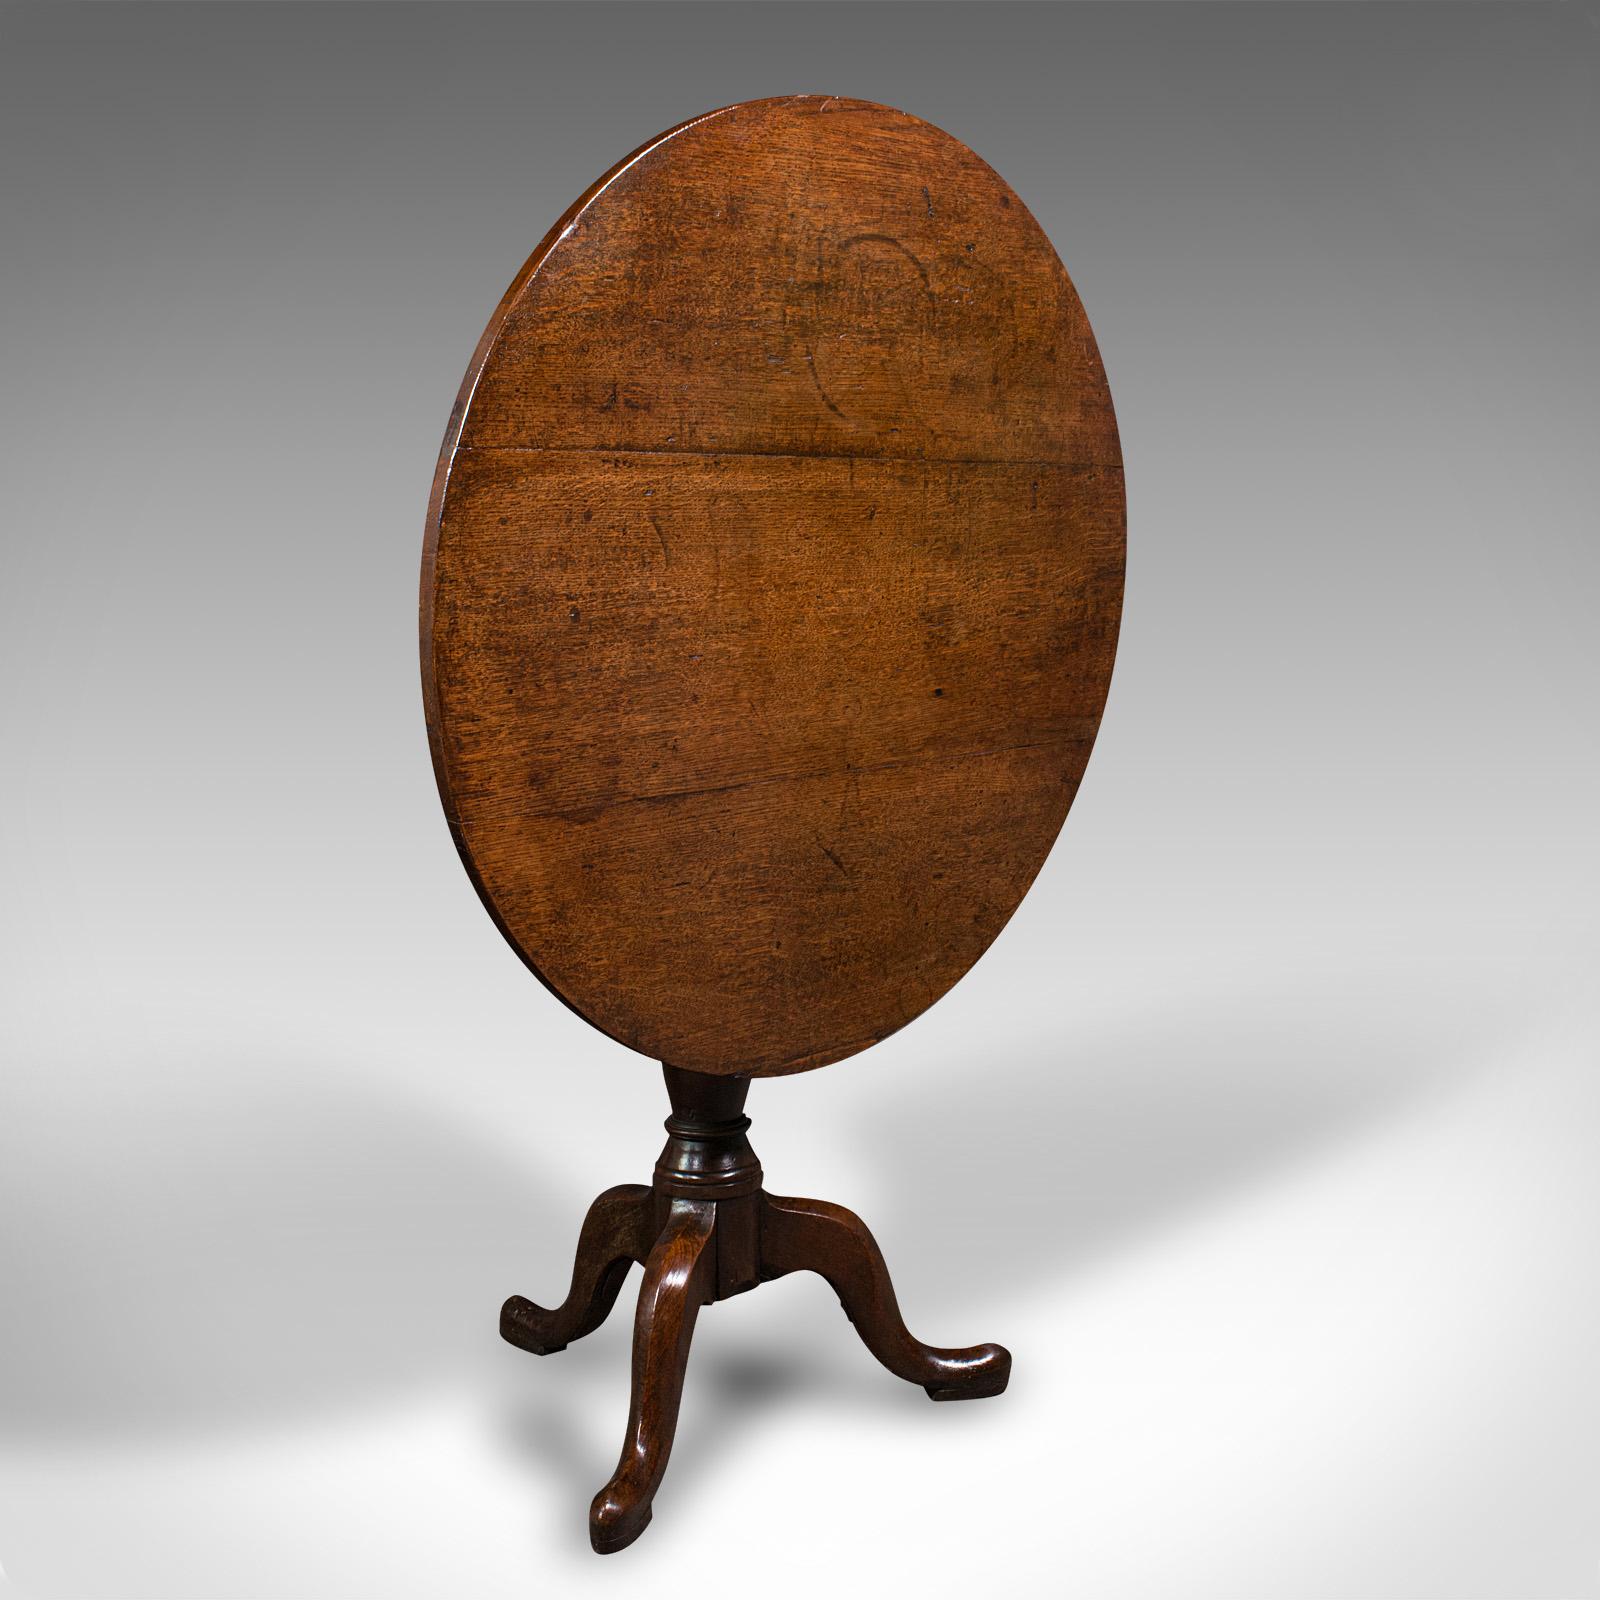 This is an antique tilt top occasional table. An English, oak side or lamp table, dating to the Georgian period, circa 1780.

Excellent example of 18th century craftsmanship, with appealing figuring
Displays a desirable aged patina and in good